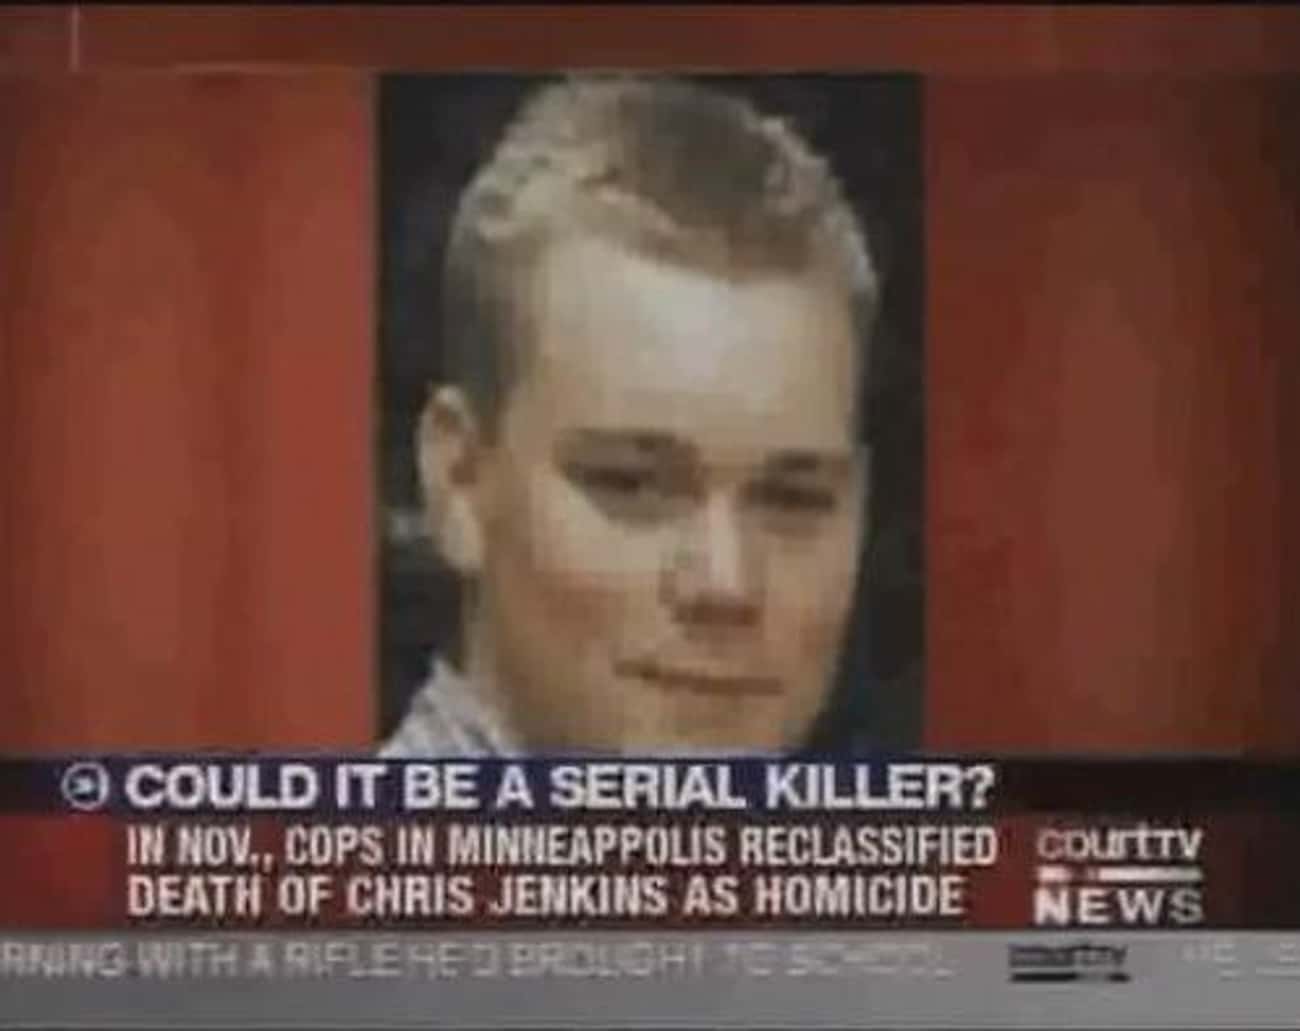 The Disappearance Of Chris Jenkins Led To The Theory